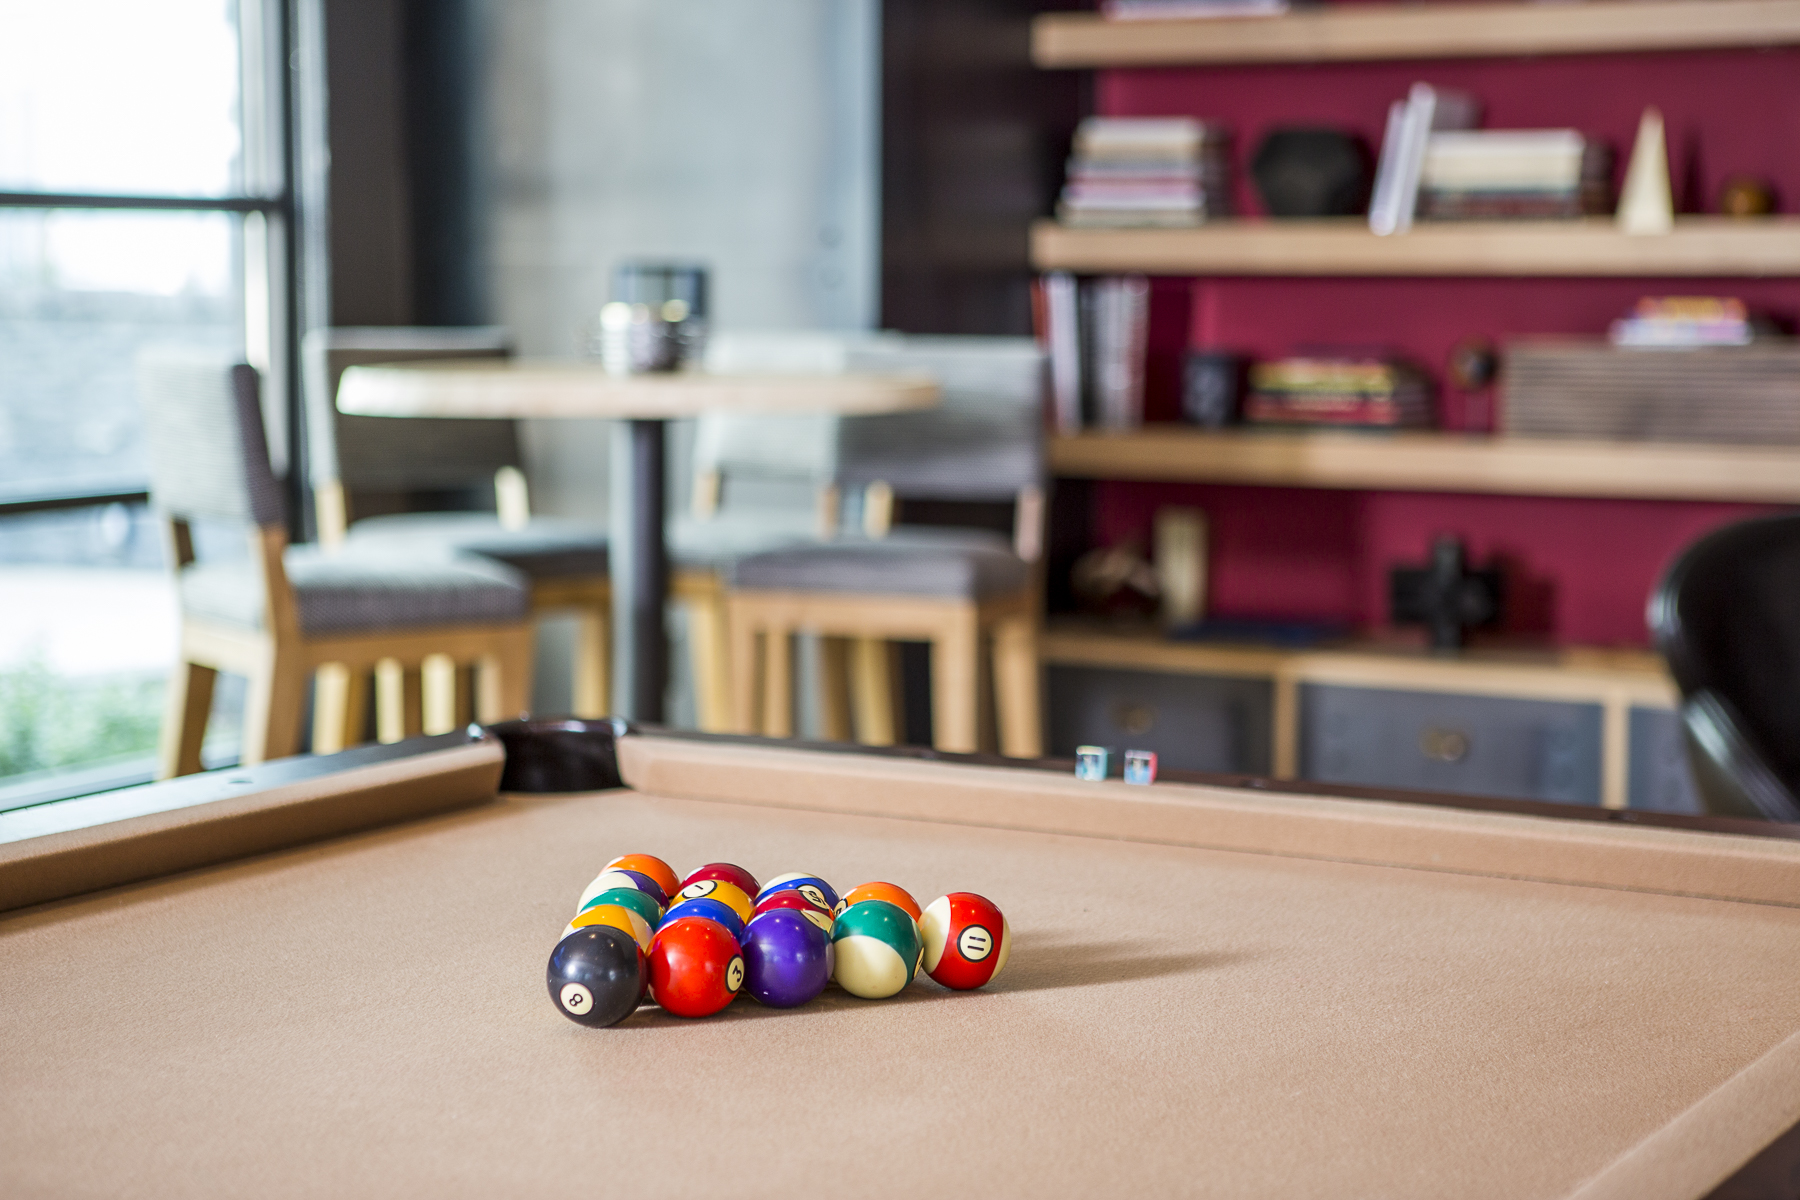 Lounge with billiards